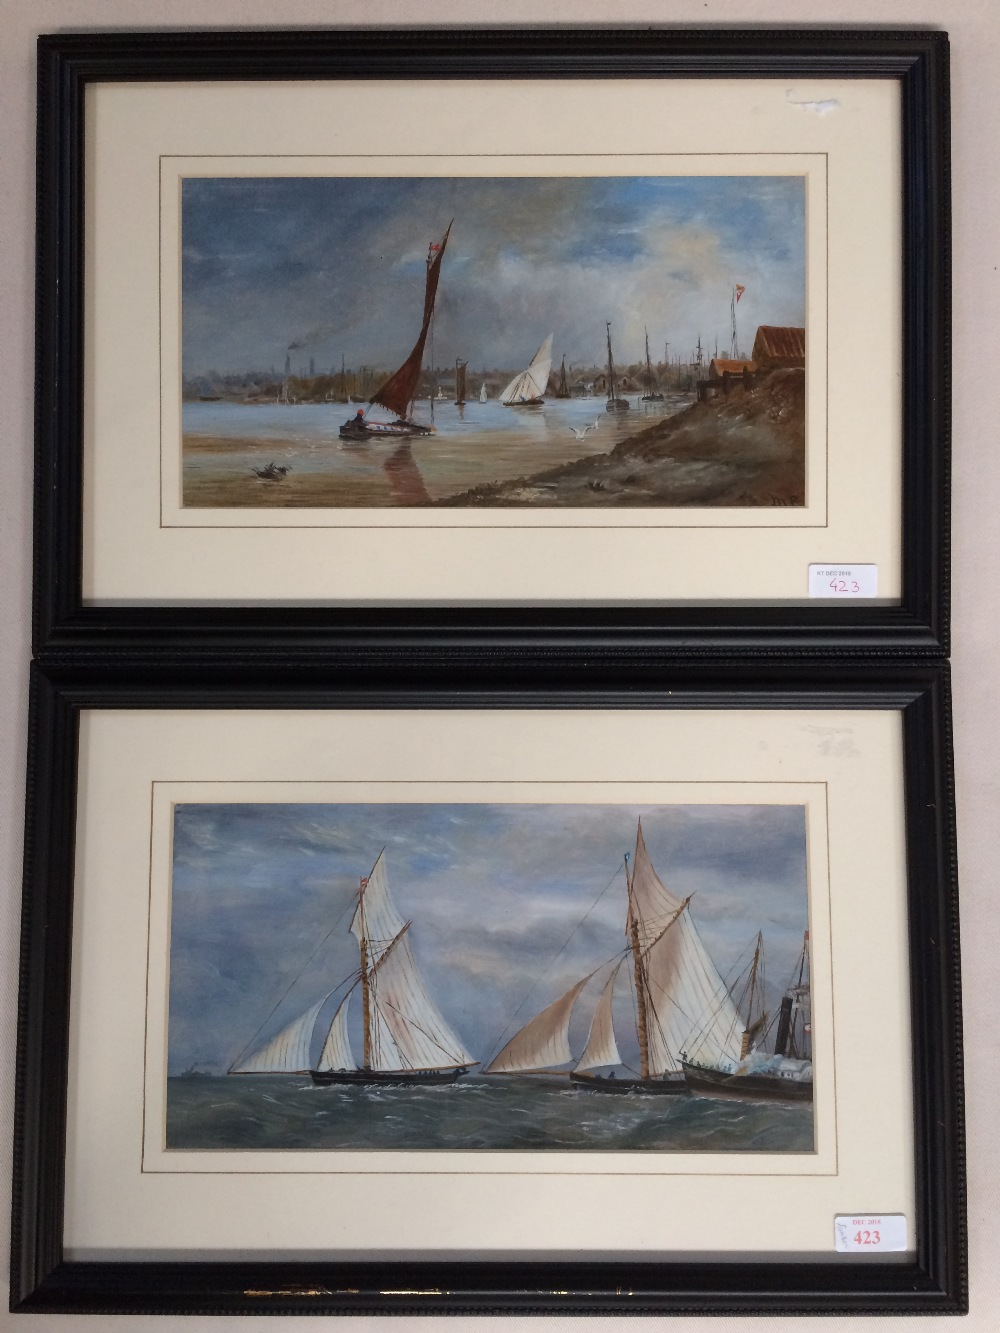 M.F. Pair modern oils on board, "Brailers Water Gt Yarmouth", Signed with initials, Lower Right,